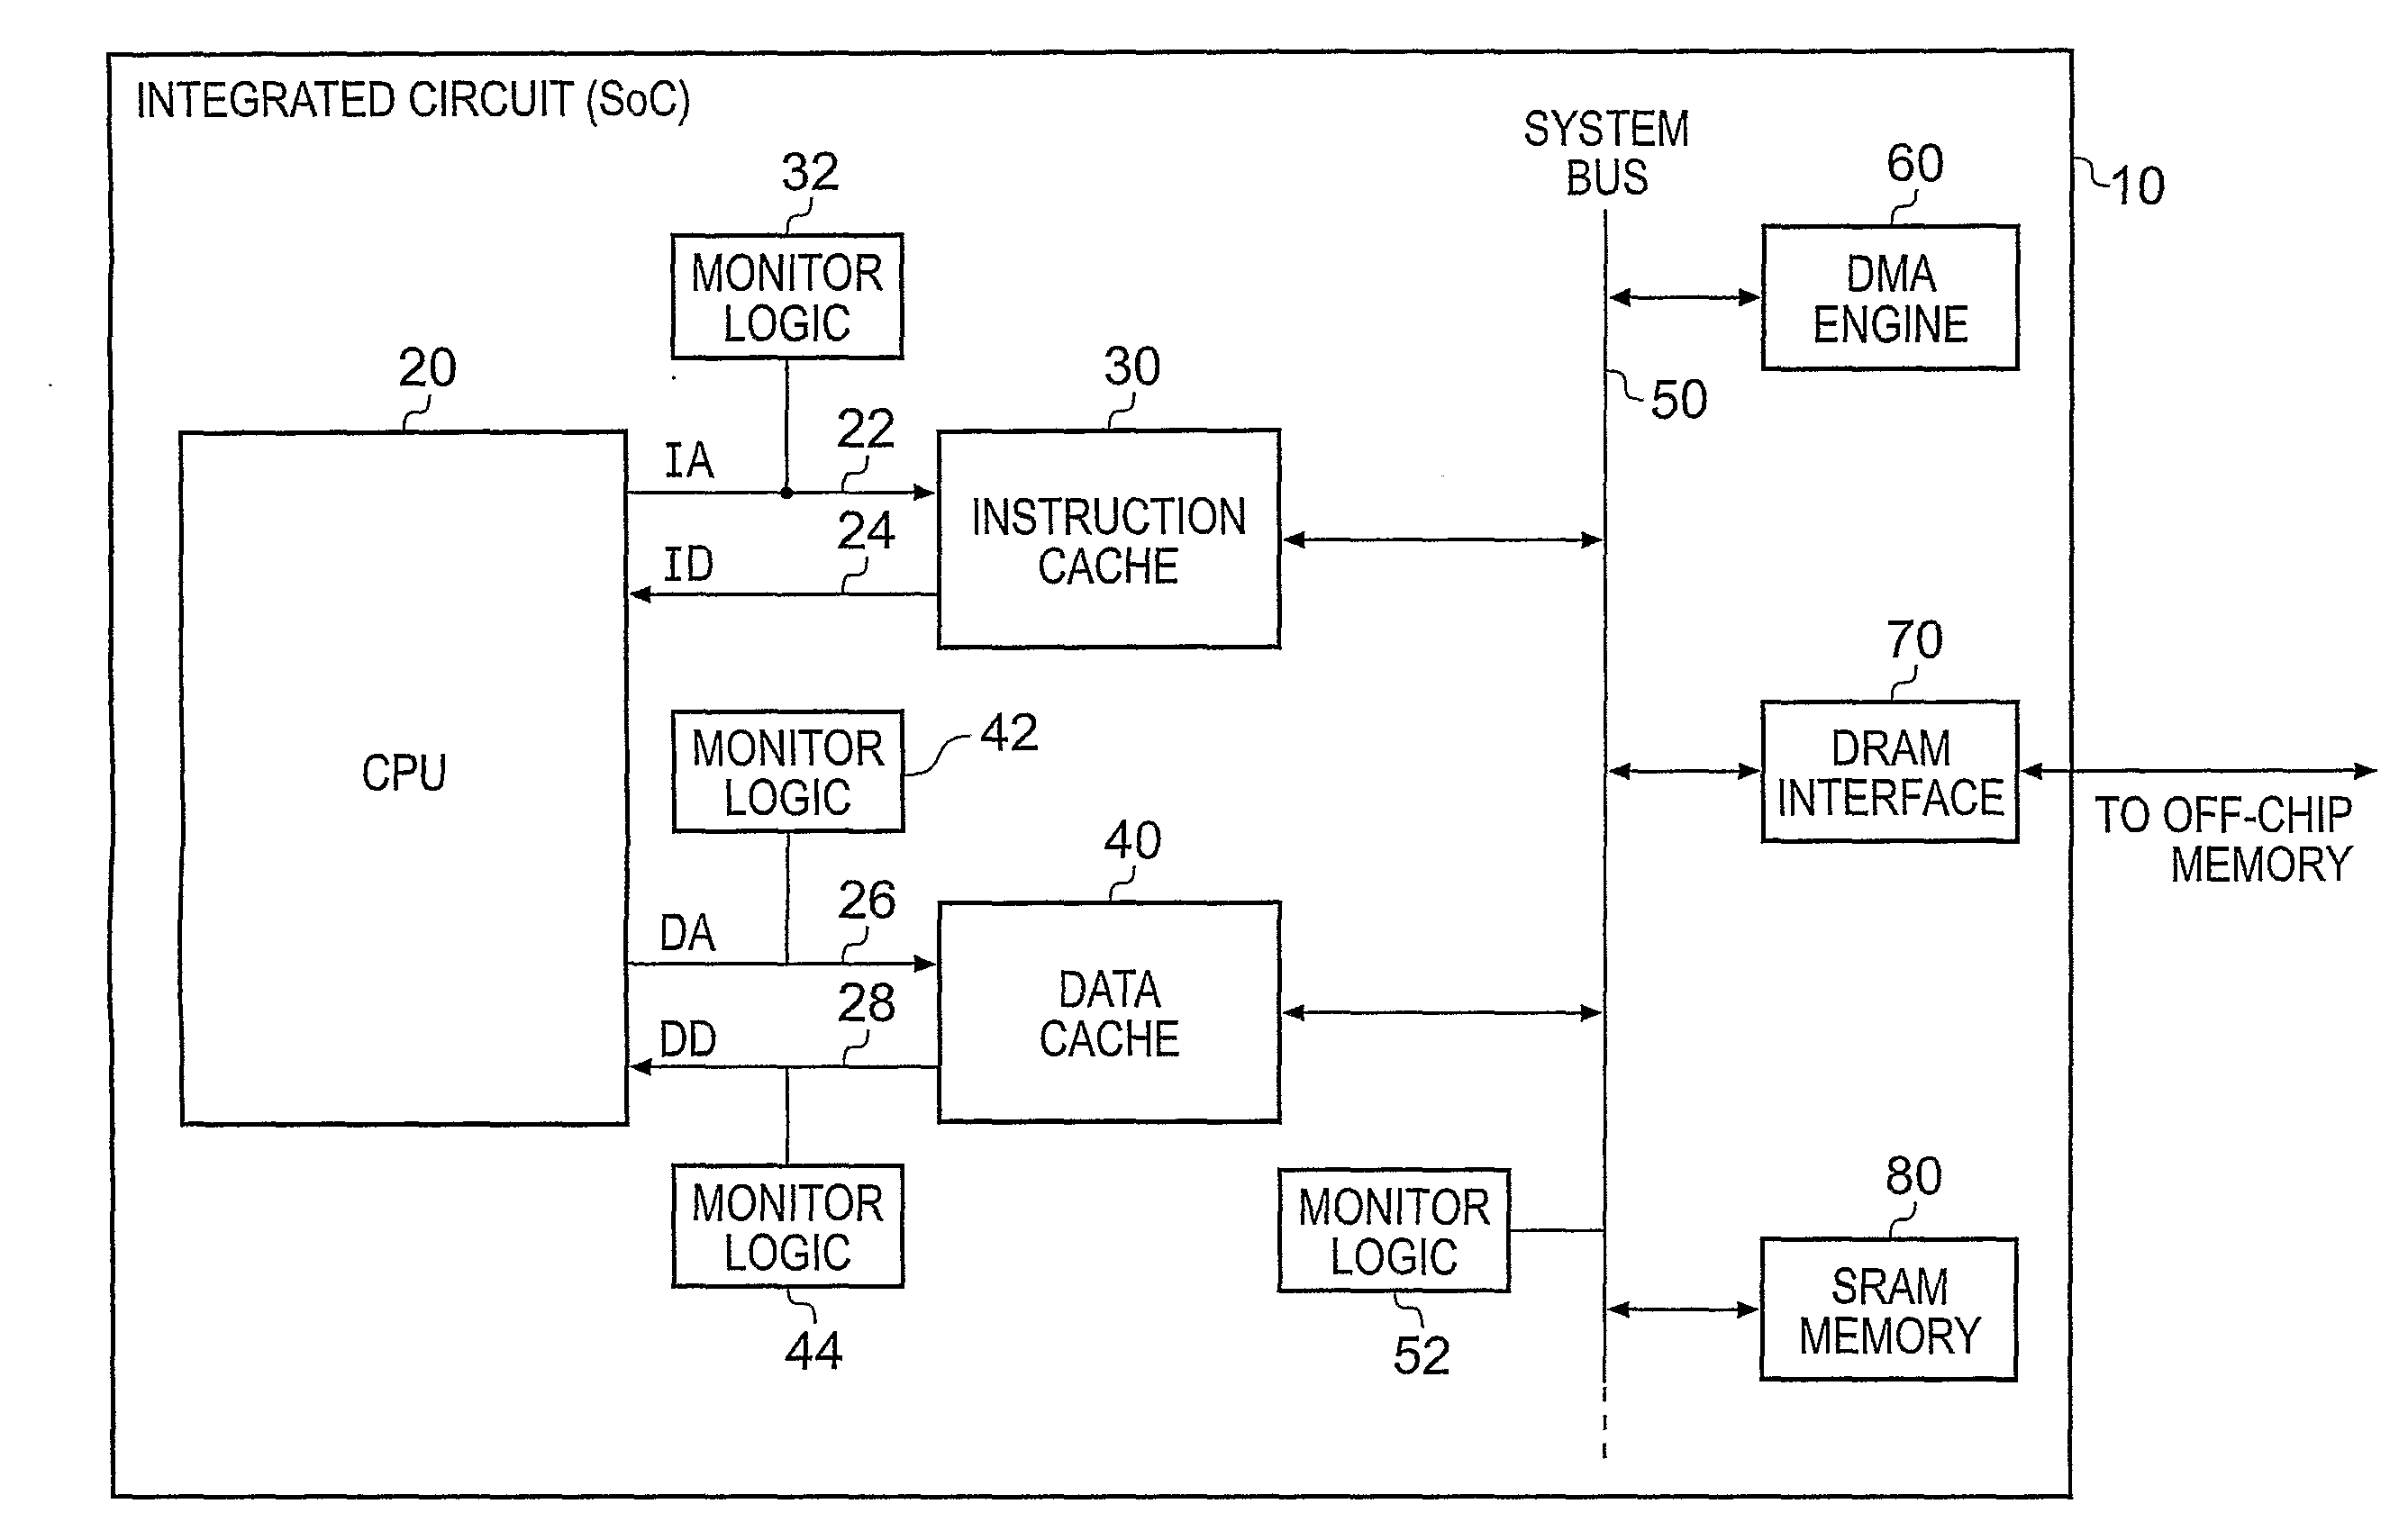 Monitoring Values of Signals within an Integrated Circuit